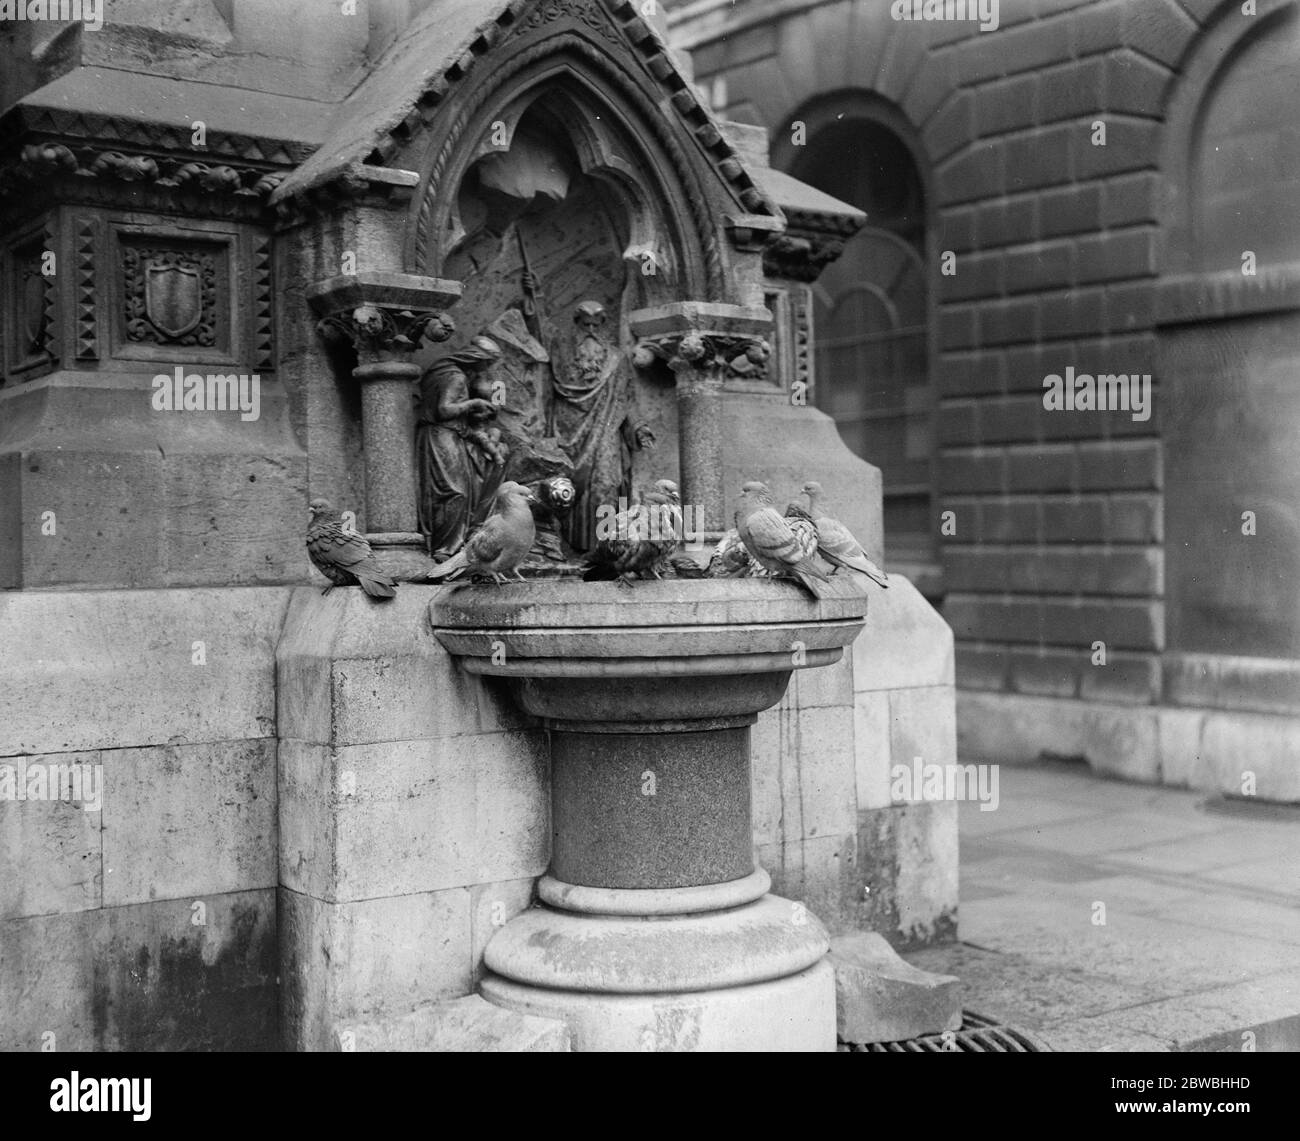 Art and nature meet in a city idyll Pigeons cluster about the antique basin of the fine old fountain in Guildhall Yard 16/02/1921 Stock Photo